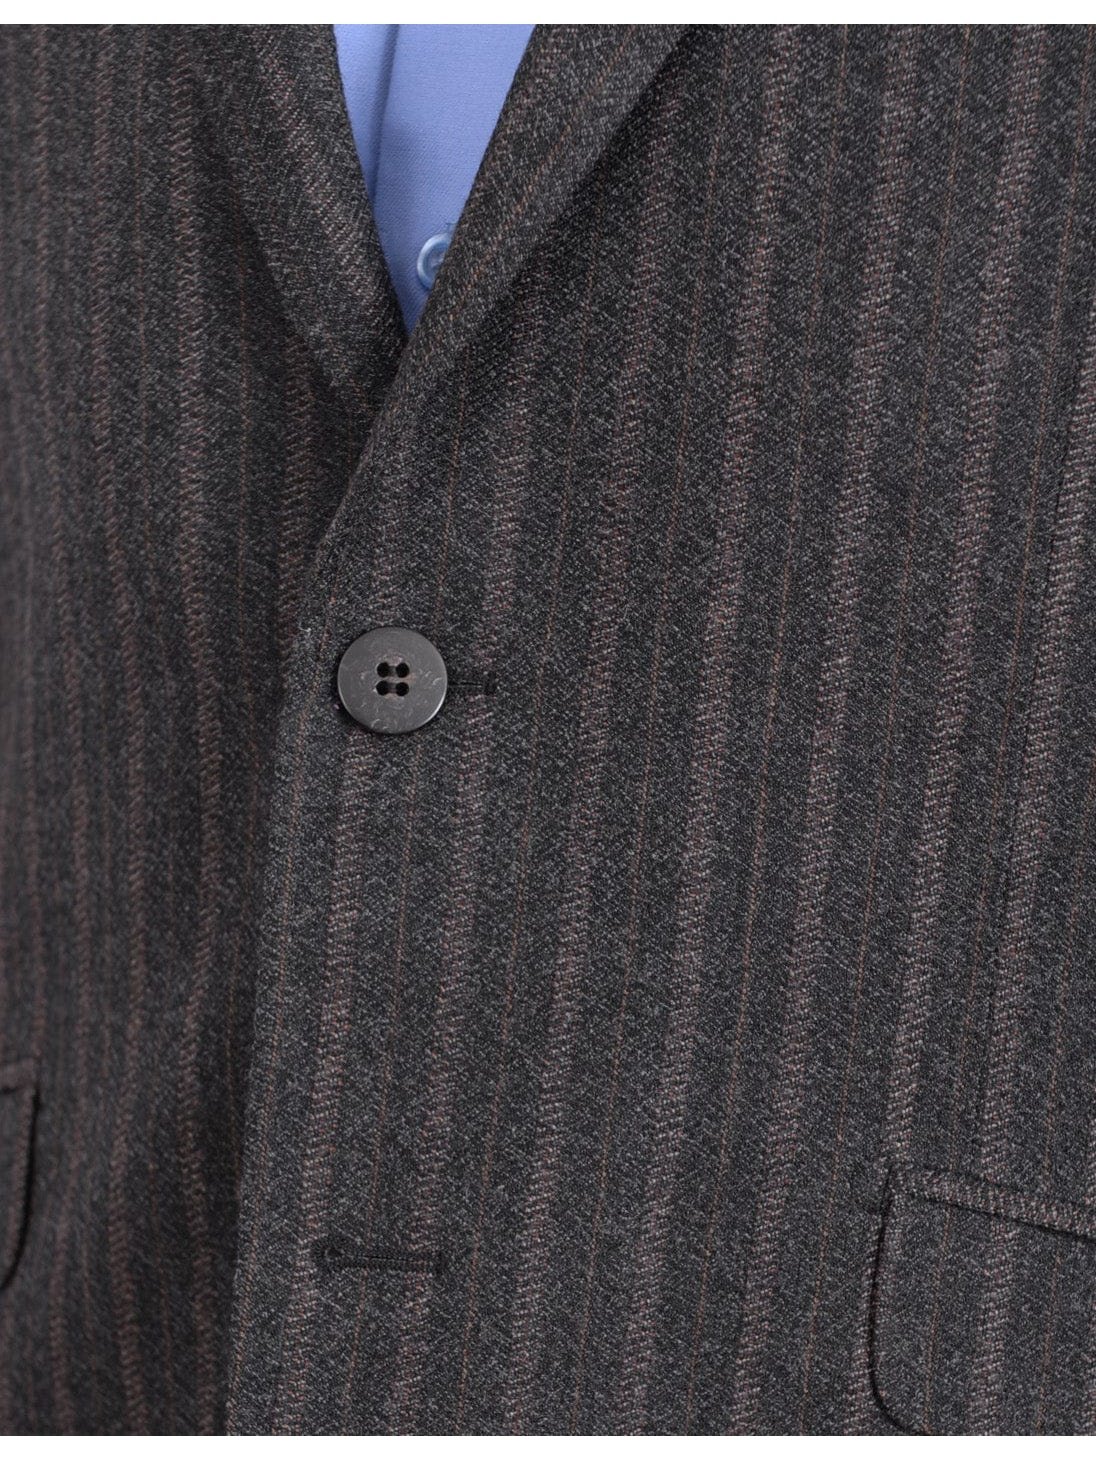 Napoli BLAZERS Napoli Gray Brown Striped Flannel Half Canvassed Wool Sportcoat Elbow Patches